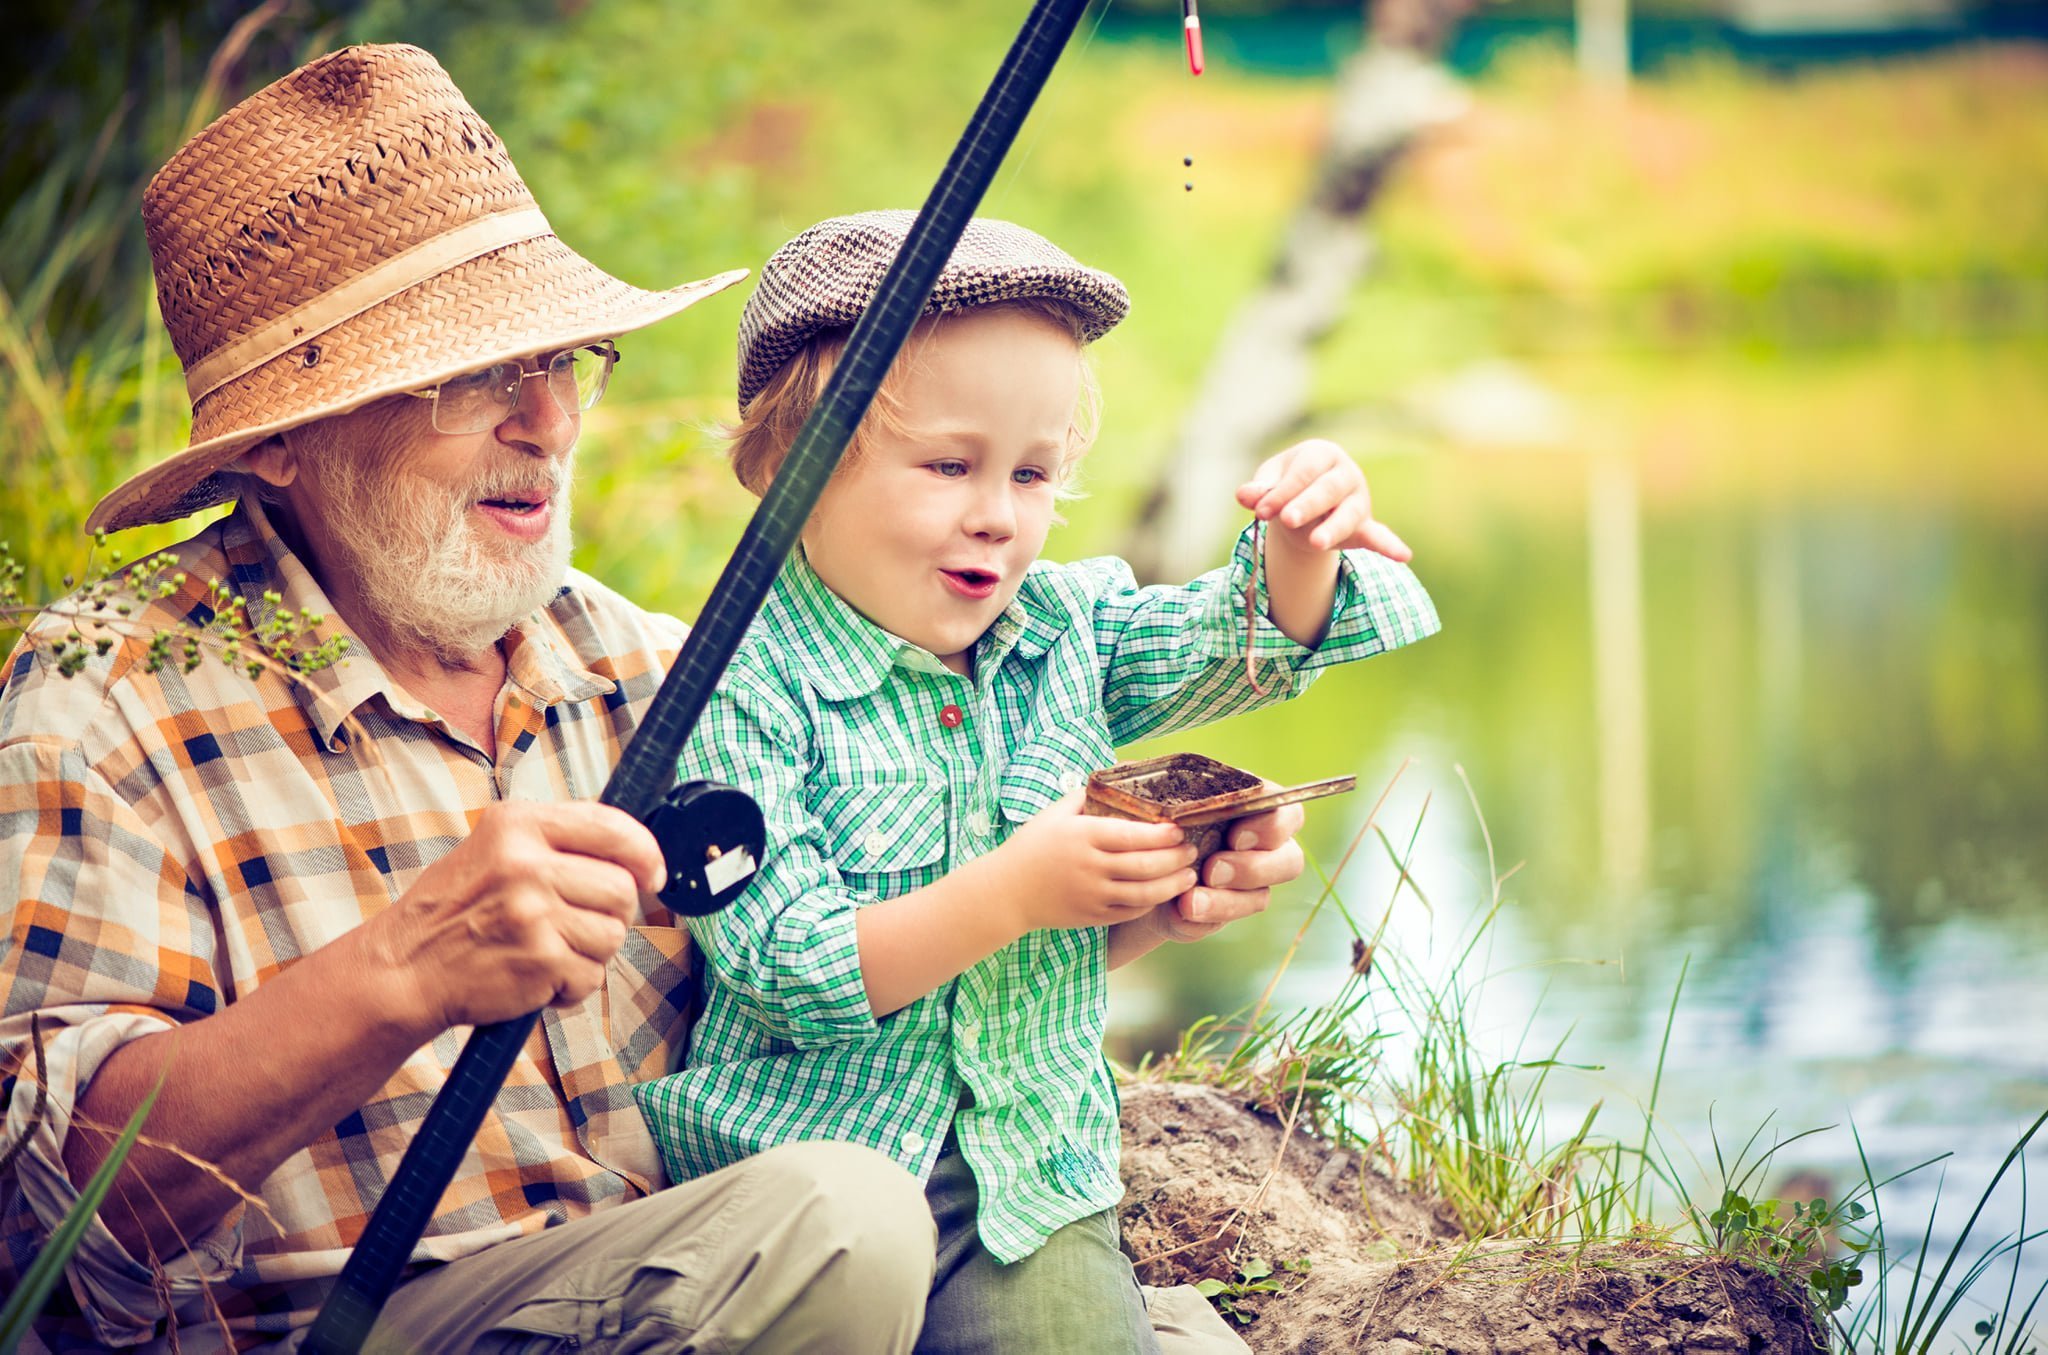 Elderly man and young child fishing